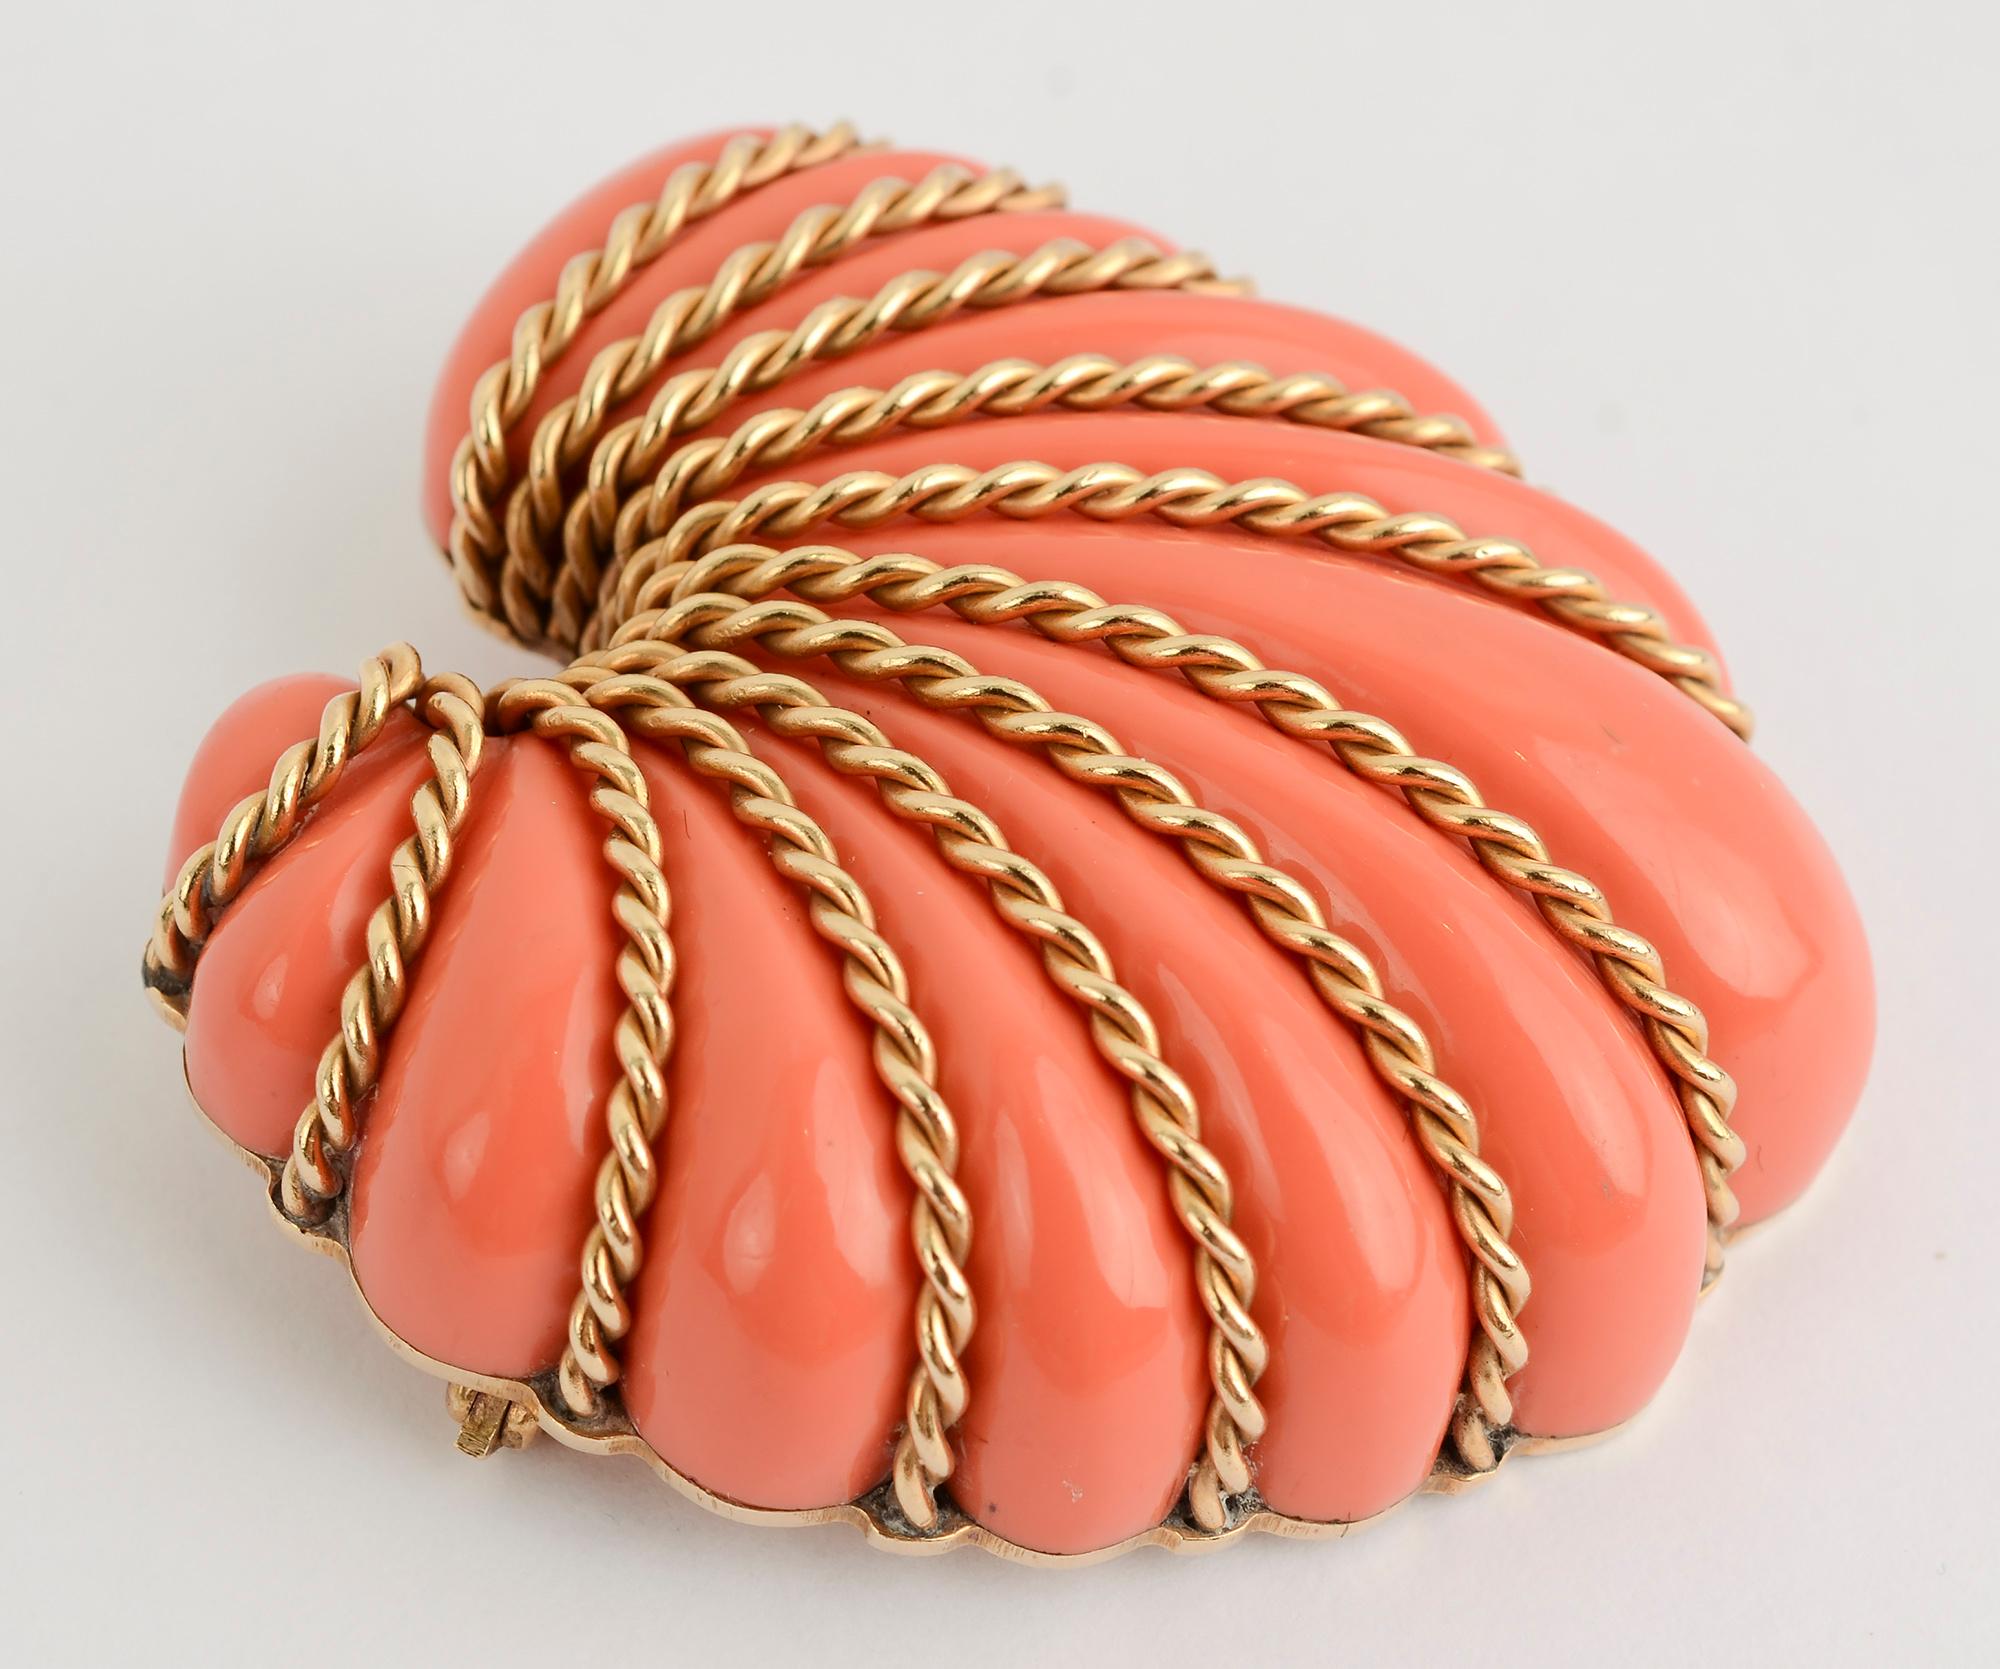 Seaman Schepps carved composite coral brooch in the shape of a seashell. The coral is highlighted with bands of twisted gold. The brooch measures 1 7/8 inches wide by 2 inches long. The gold is 14 karat as was used by Schepps until the 1970's.